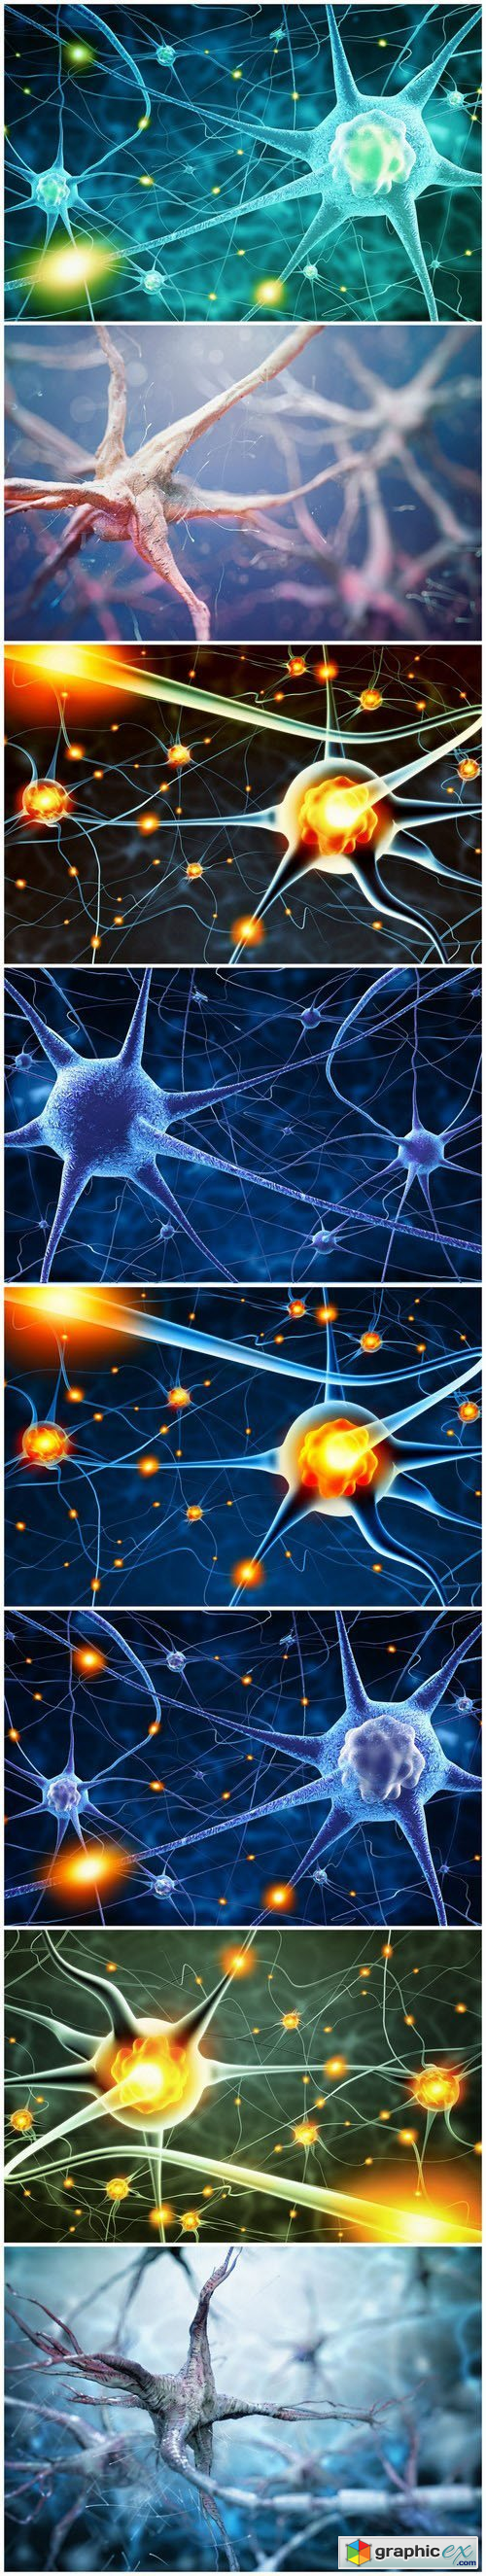 Active nerve cells - Set of 8xUHQ JPEG Professional Stock Images